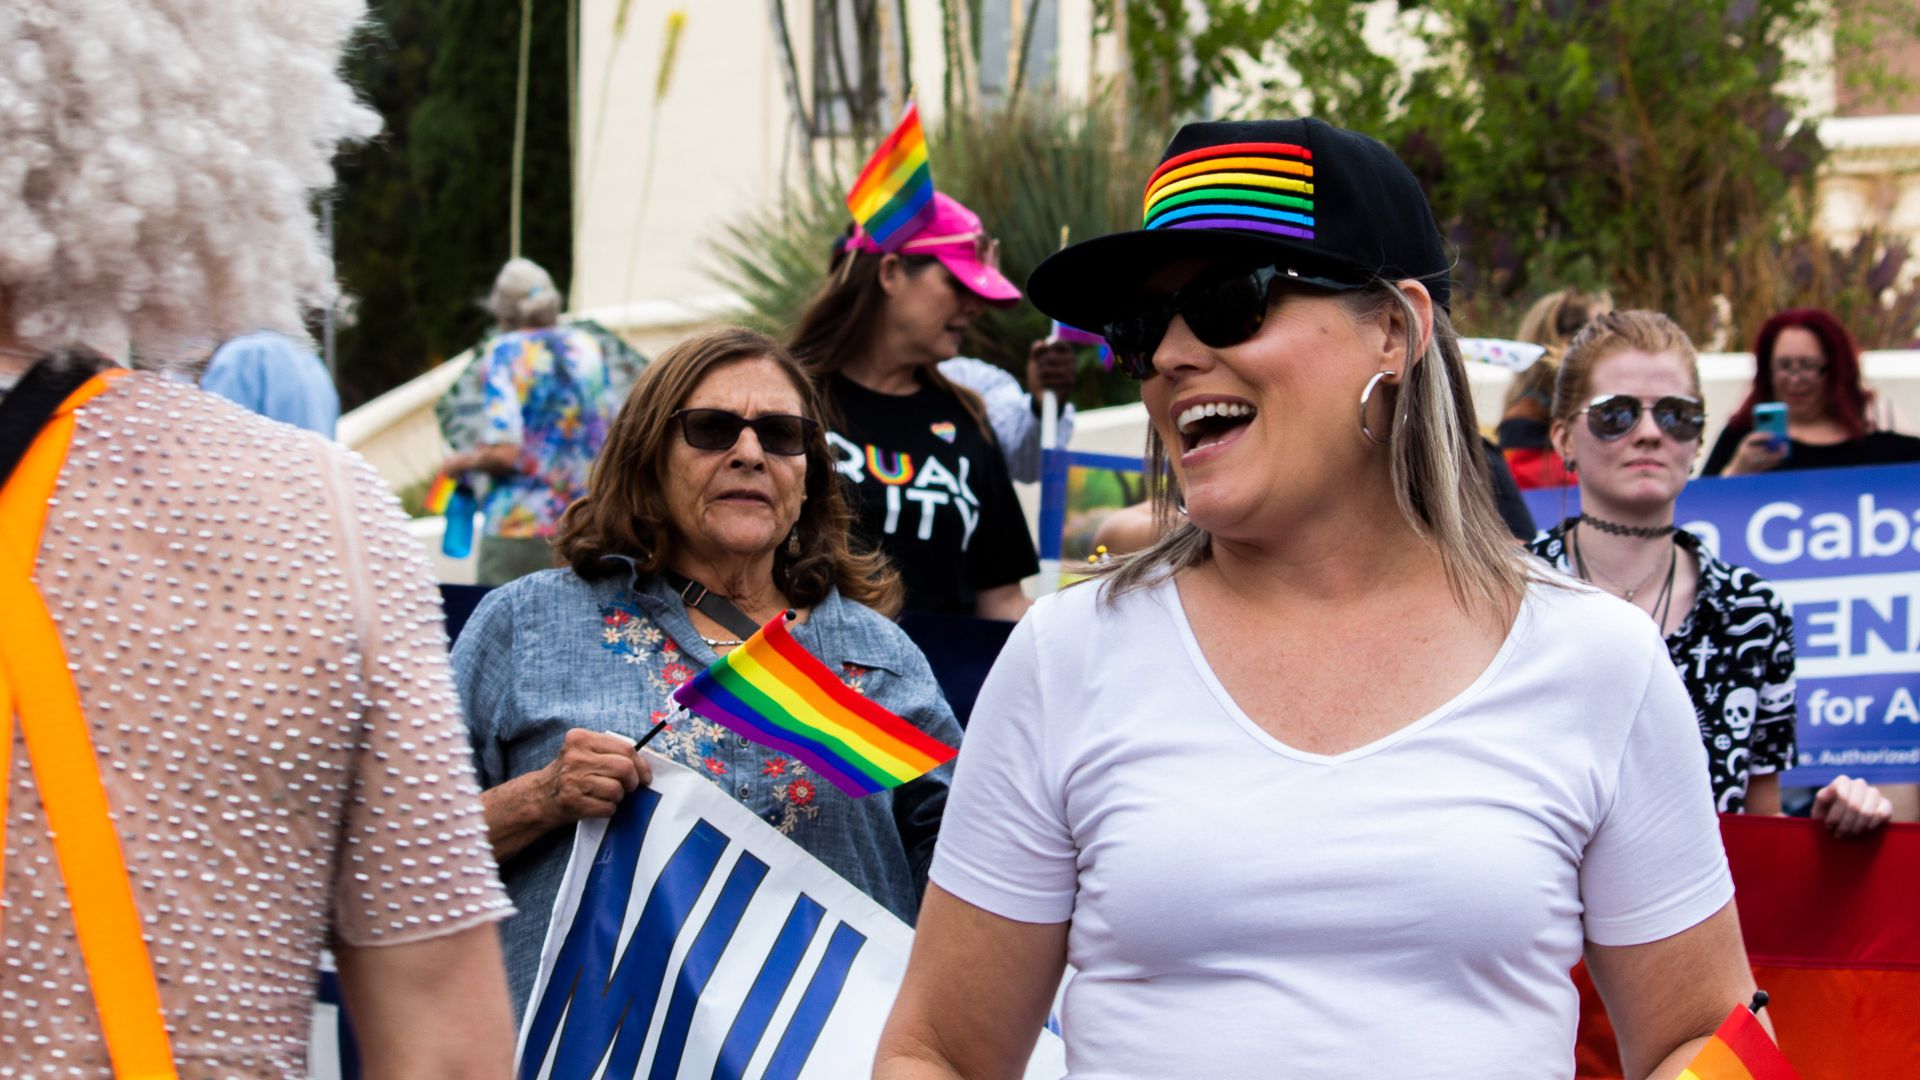 A woman smiling in a crowd wearing a hat with a rainbow.